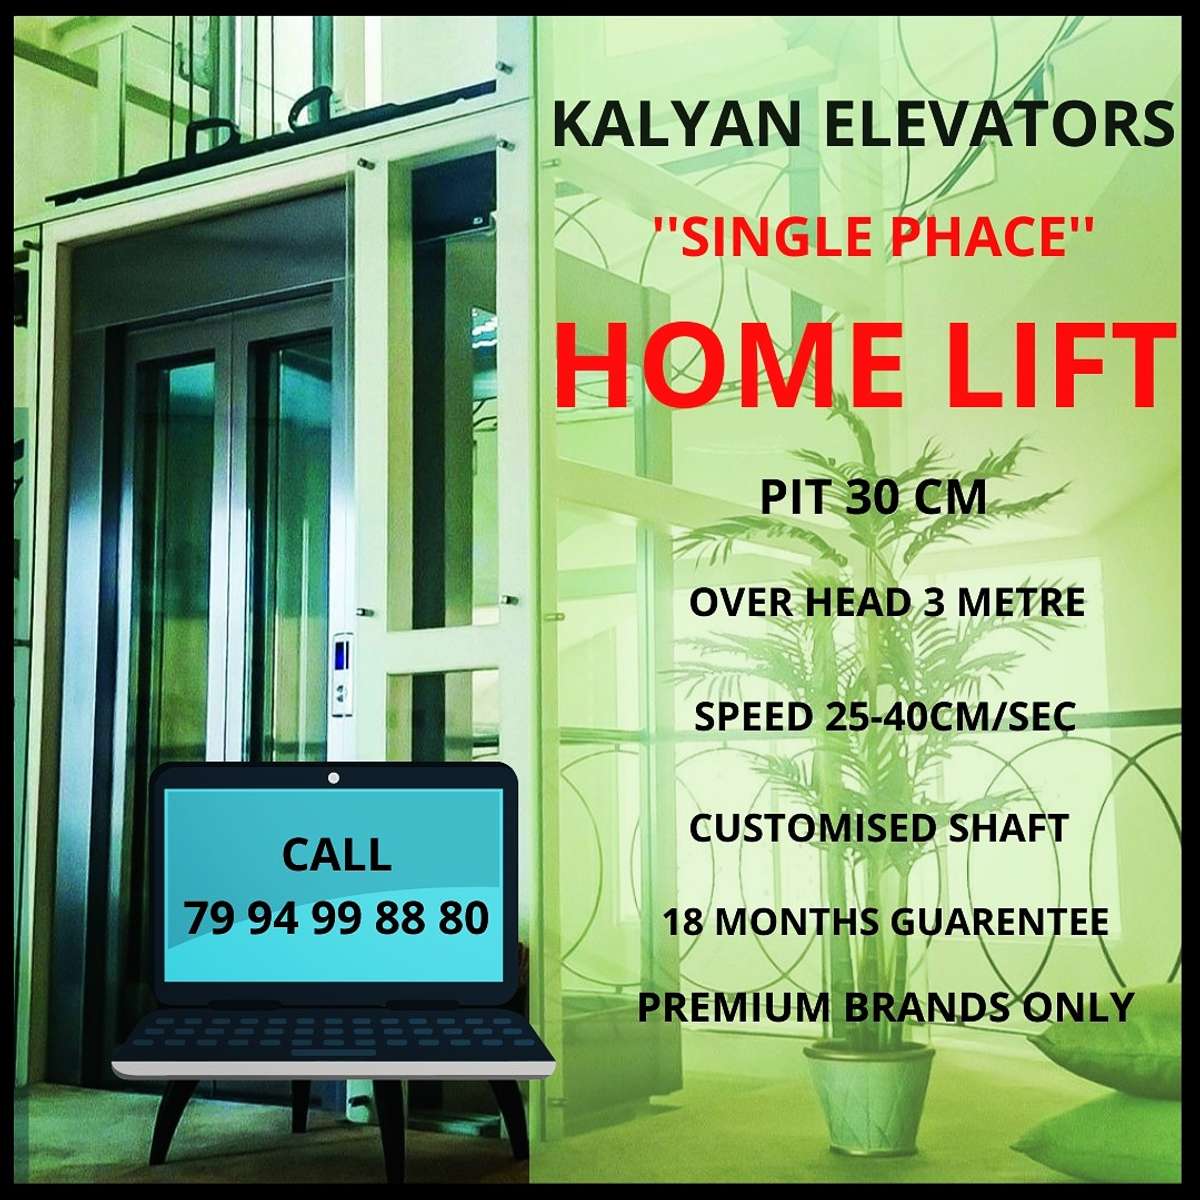 Kalyan Home Elevators offers the long-awaited solution to vertical mobility within homes at affordable prices and easy-to-use features. Our customized and aesthetically designed home lifts are easily installable in preexisting homes as well as houses under construction, and help you relieve the headache of climbing. More details:- call.....

we do all kind of :-
Home Lifts
Hospital Lifts
Capsule Lifts
Commercial Lifts
Customised Passenger Lifts
Car Lifts
Parking Lifts